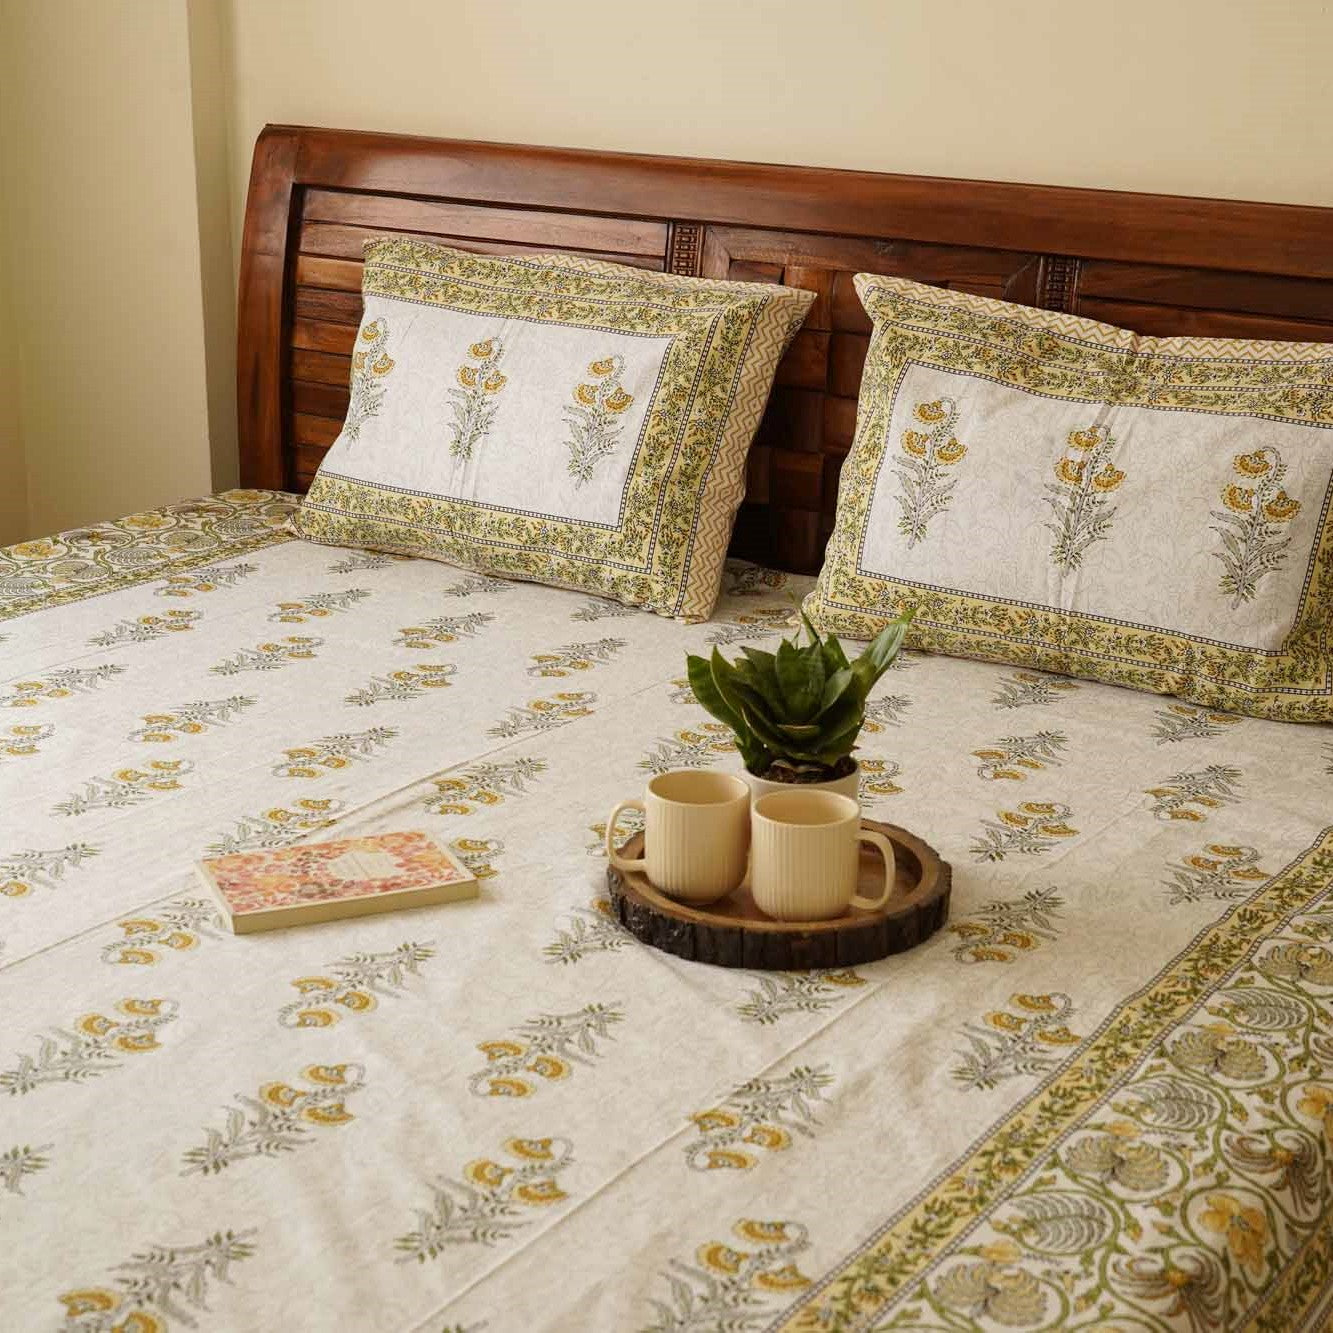 Kanak – Flat/Fitted Bedsheet (90x108 Inches)